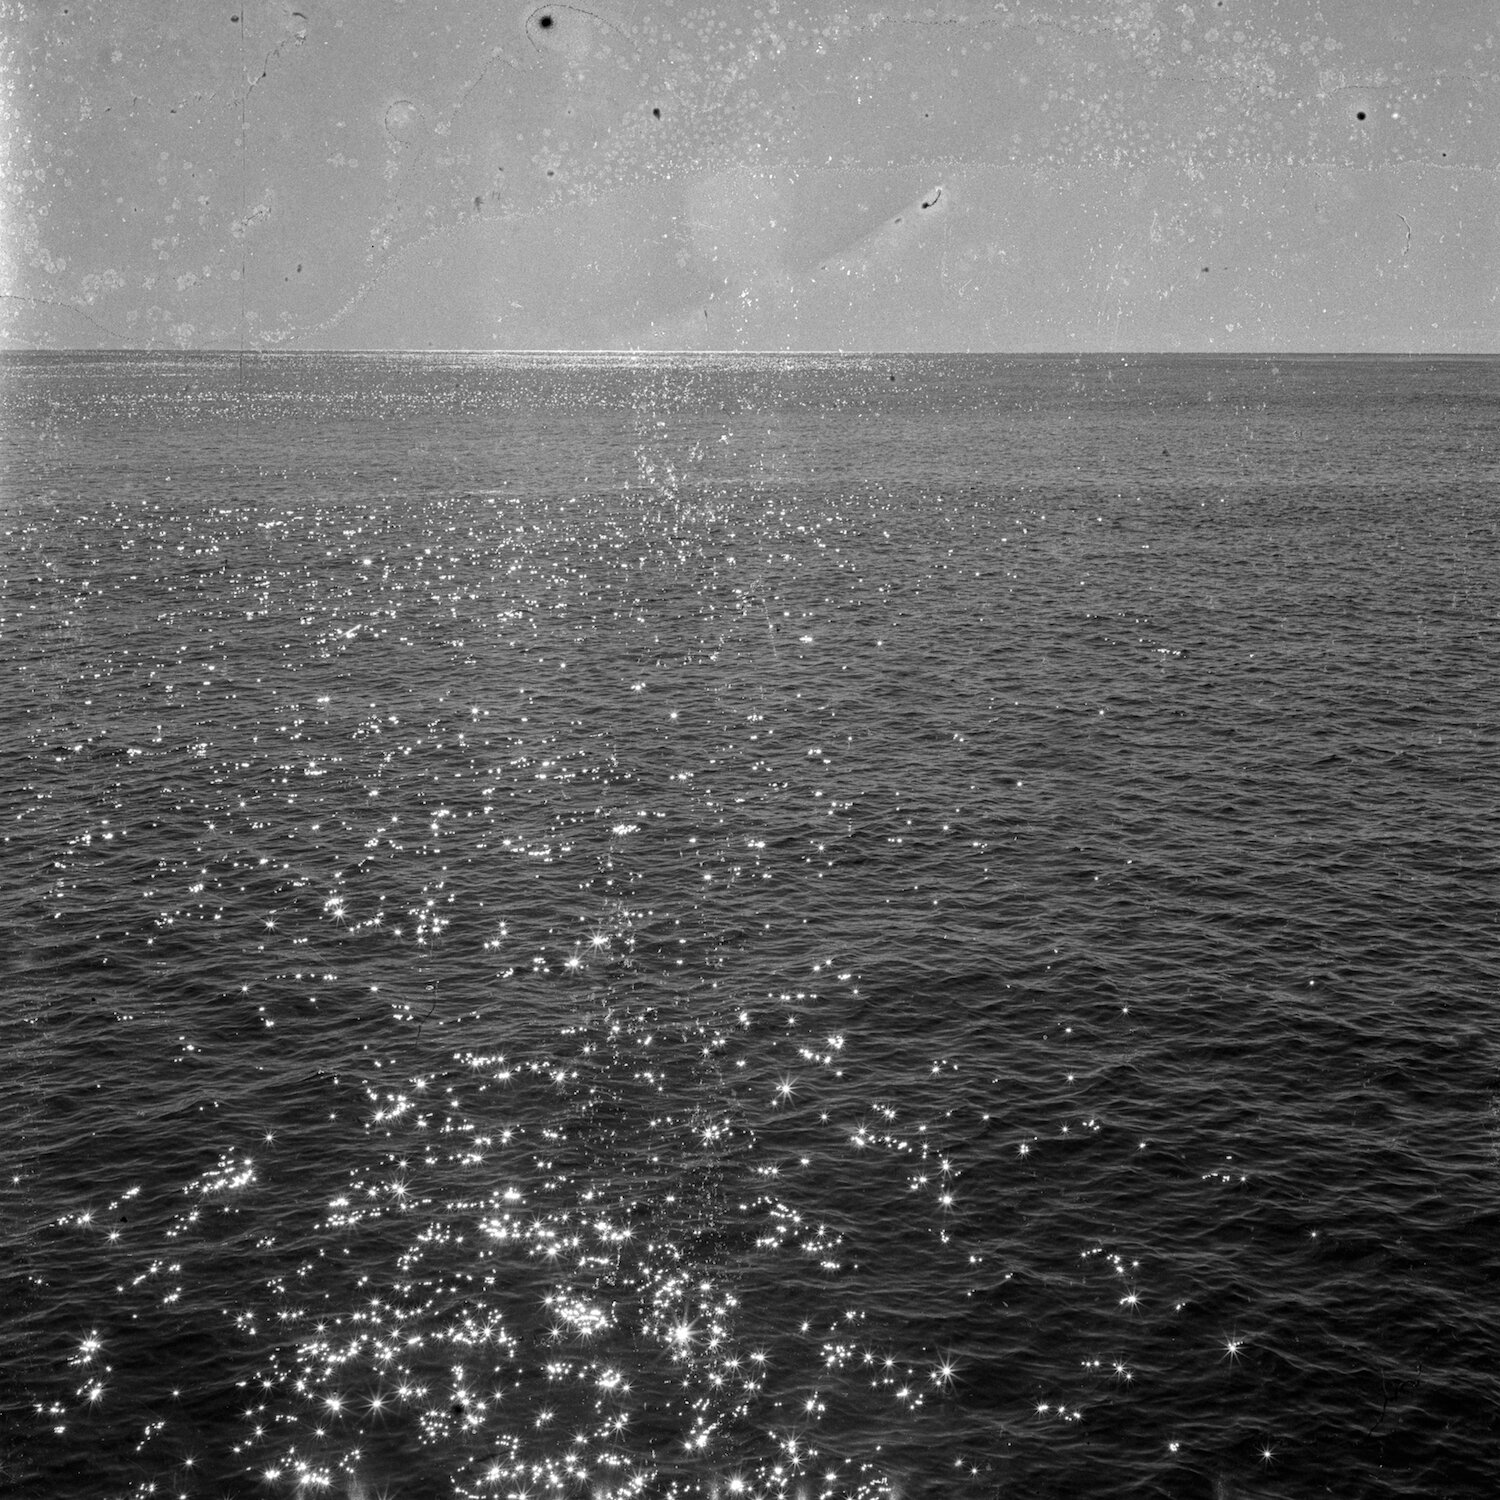   Whale Watching at Tathra Wharf, 2020, [6x6 photographic negative developed with Kodak XTOL and ocean water collected from site], pigment ink printed on archival Hahnemühle Photo Rag 308gsm paper, 60.4cm W x 85.1cm H, framed, edition of 10 + AP, sig